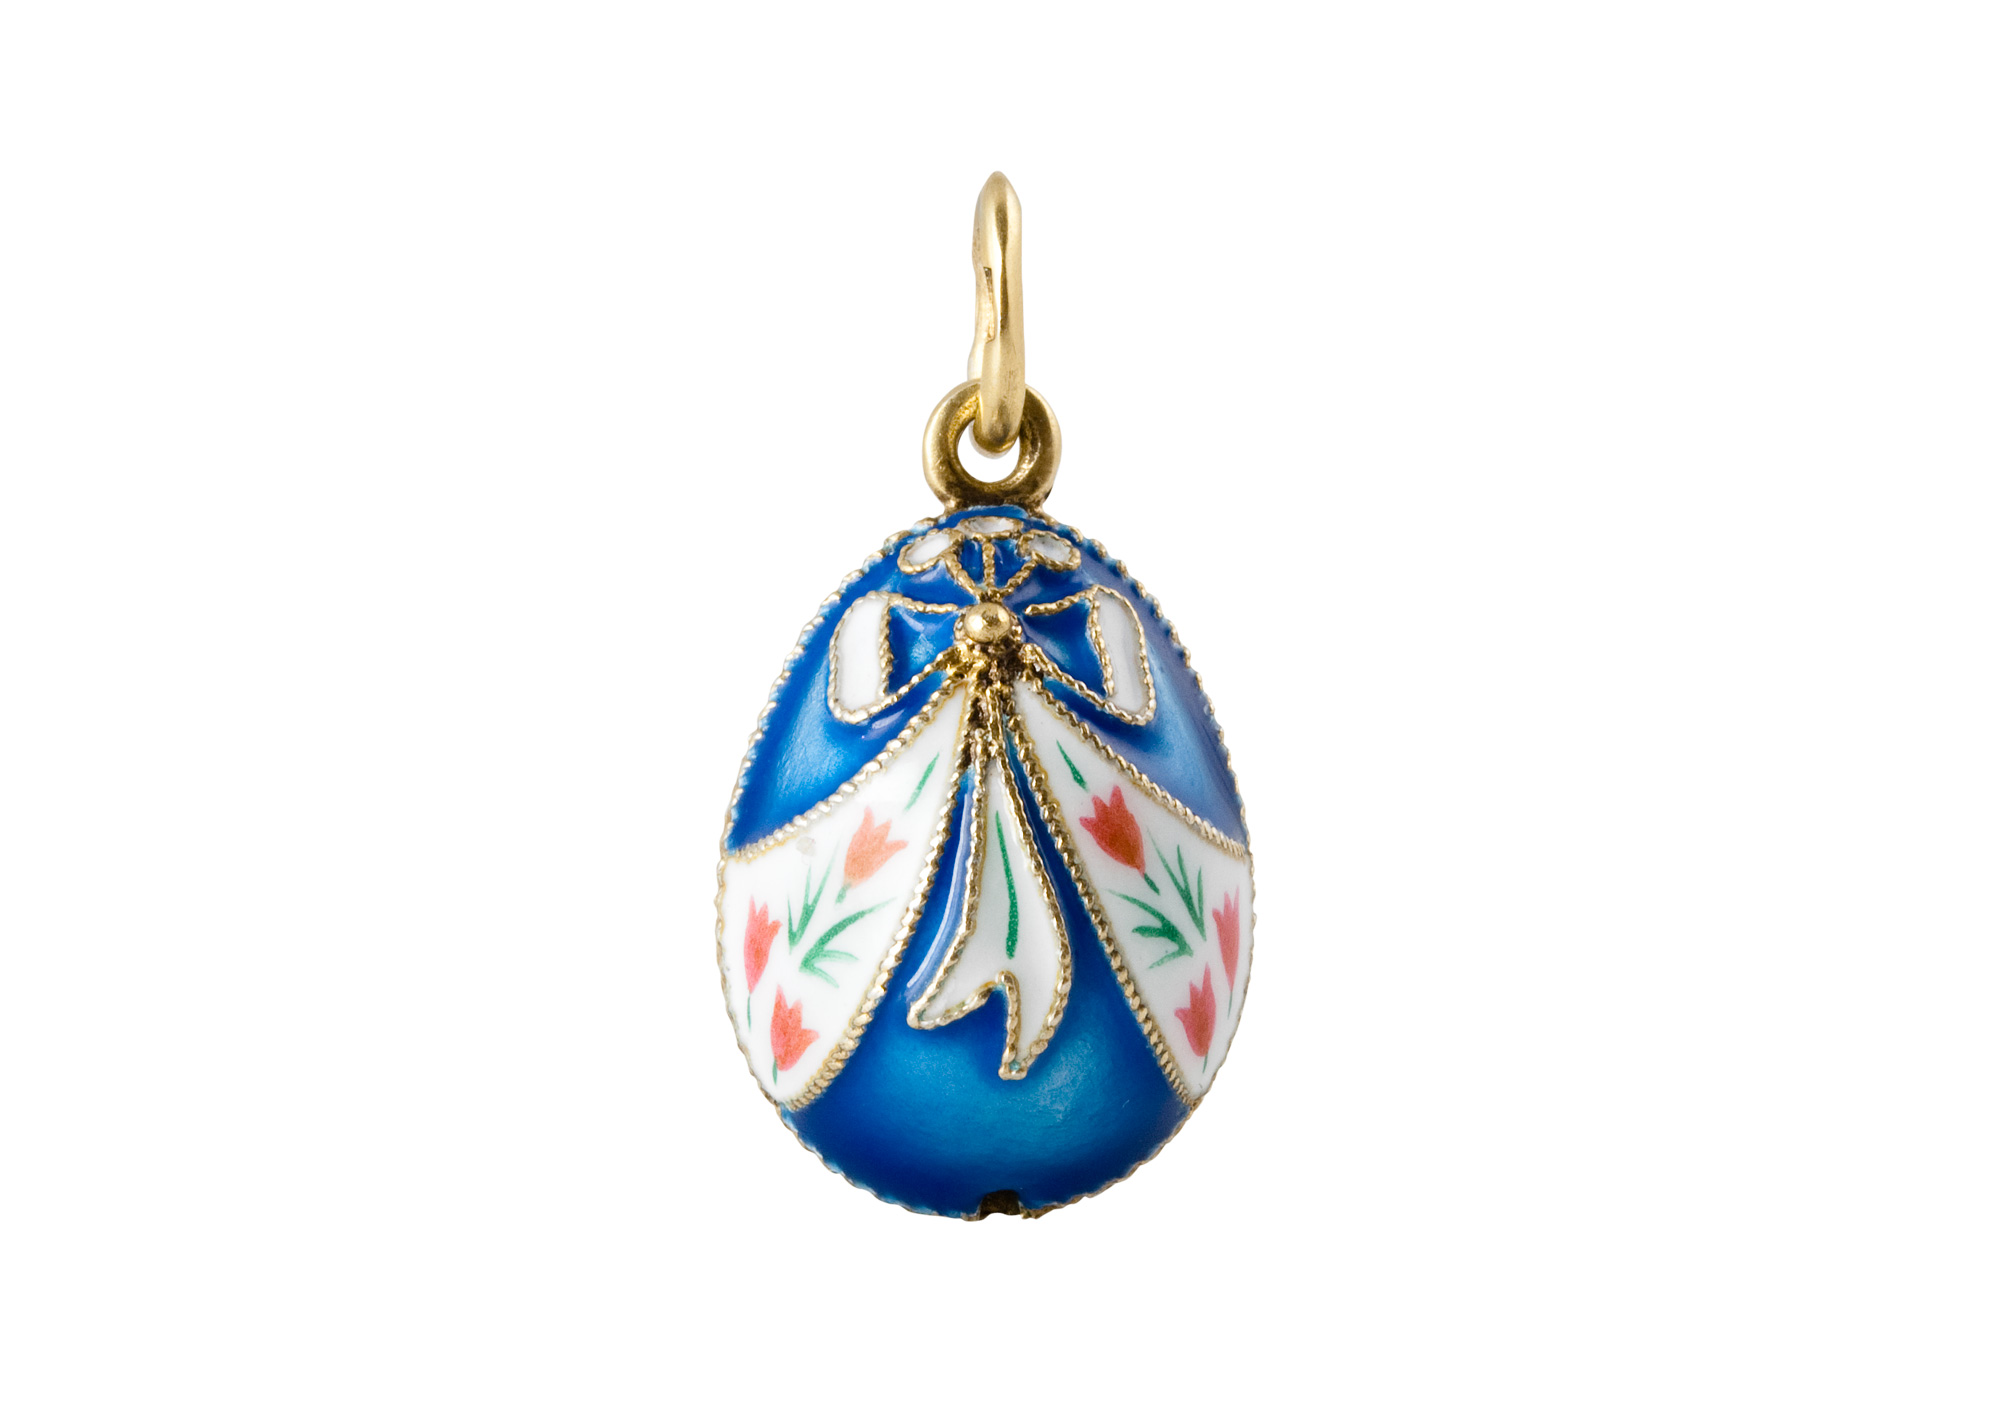 Buy Faberge-Style Egg Pendant "Blue Country Ribbons" at GoldenCockerel.com